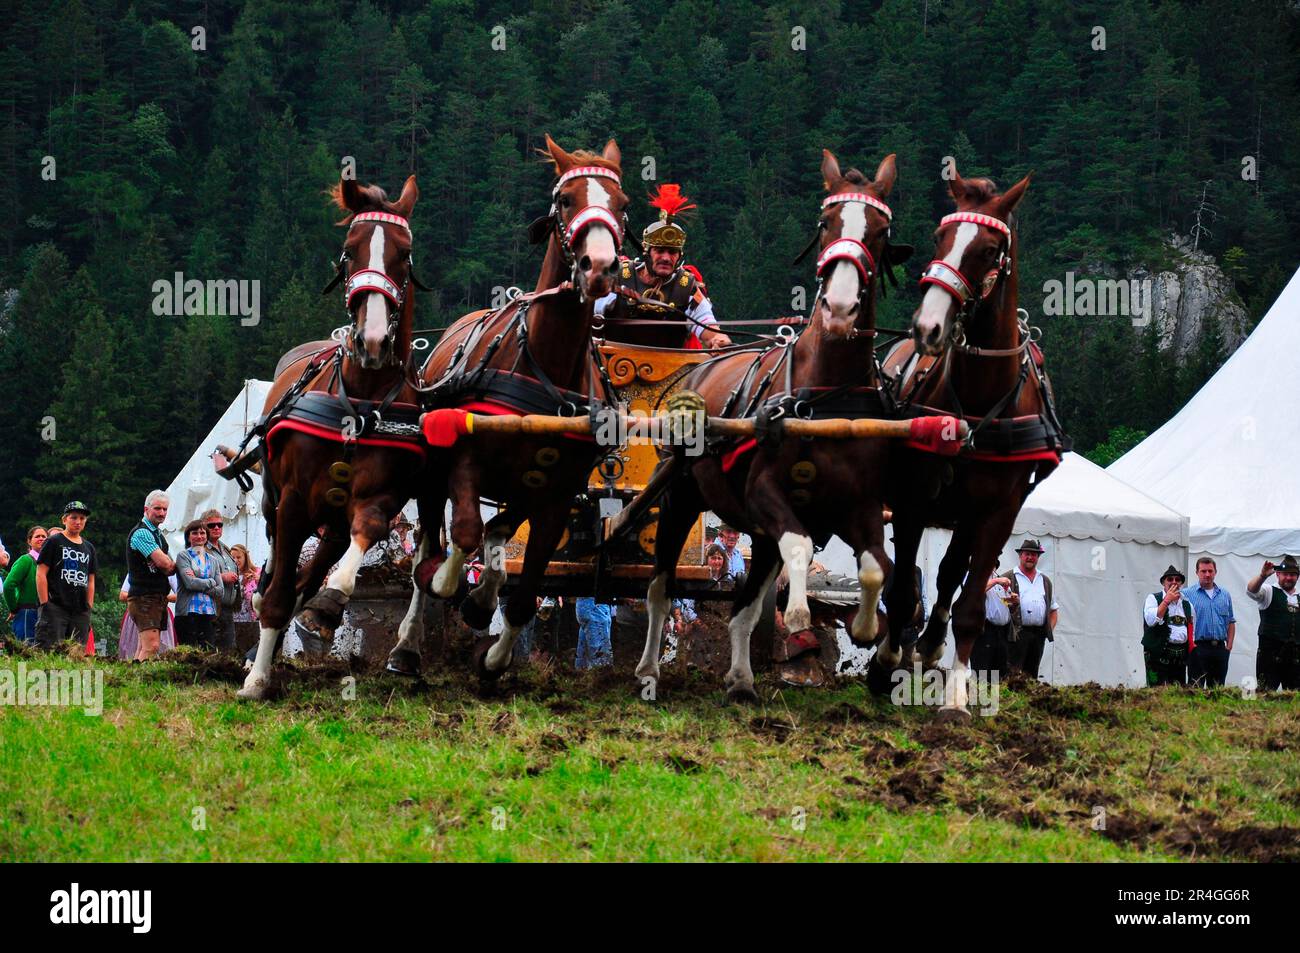 Horse-drawn carriage, Roman carriage, Georgi ride, horse festival, Isar valley, Mittenwald, Upper Bavaria, Bavaria, four-in-hand, Germany Stock Photo